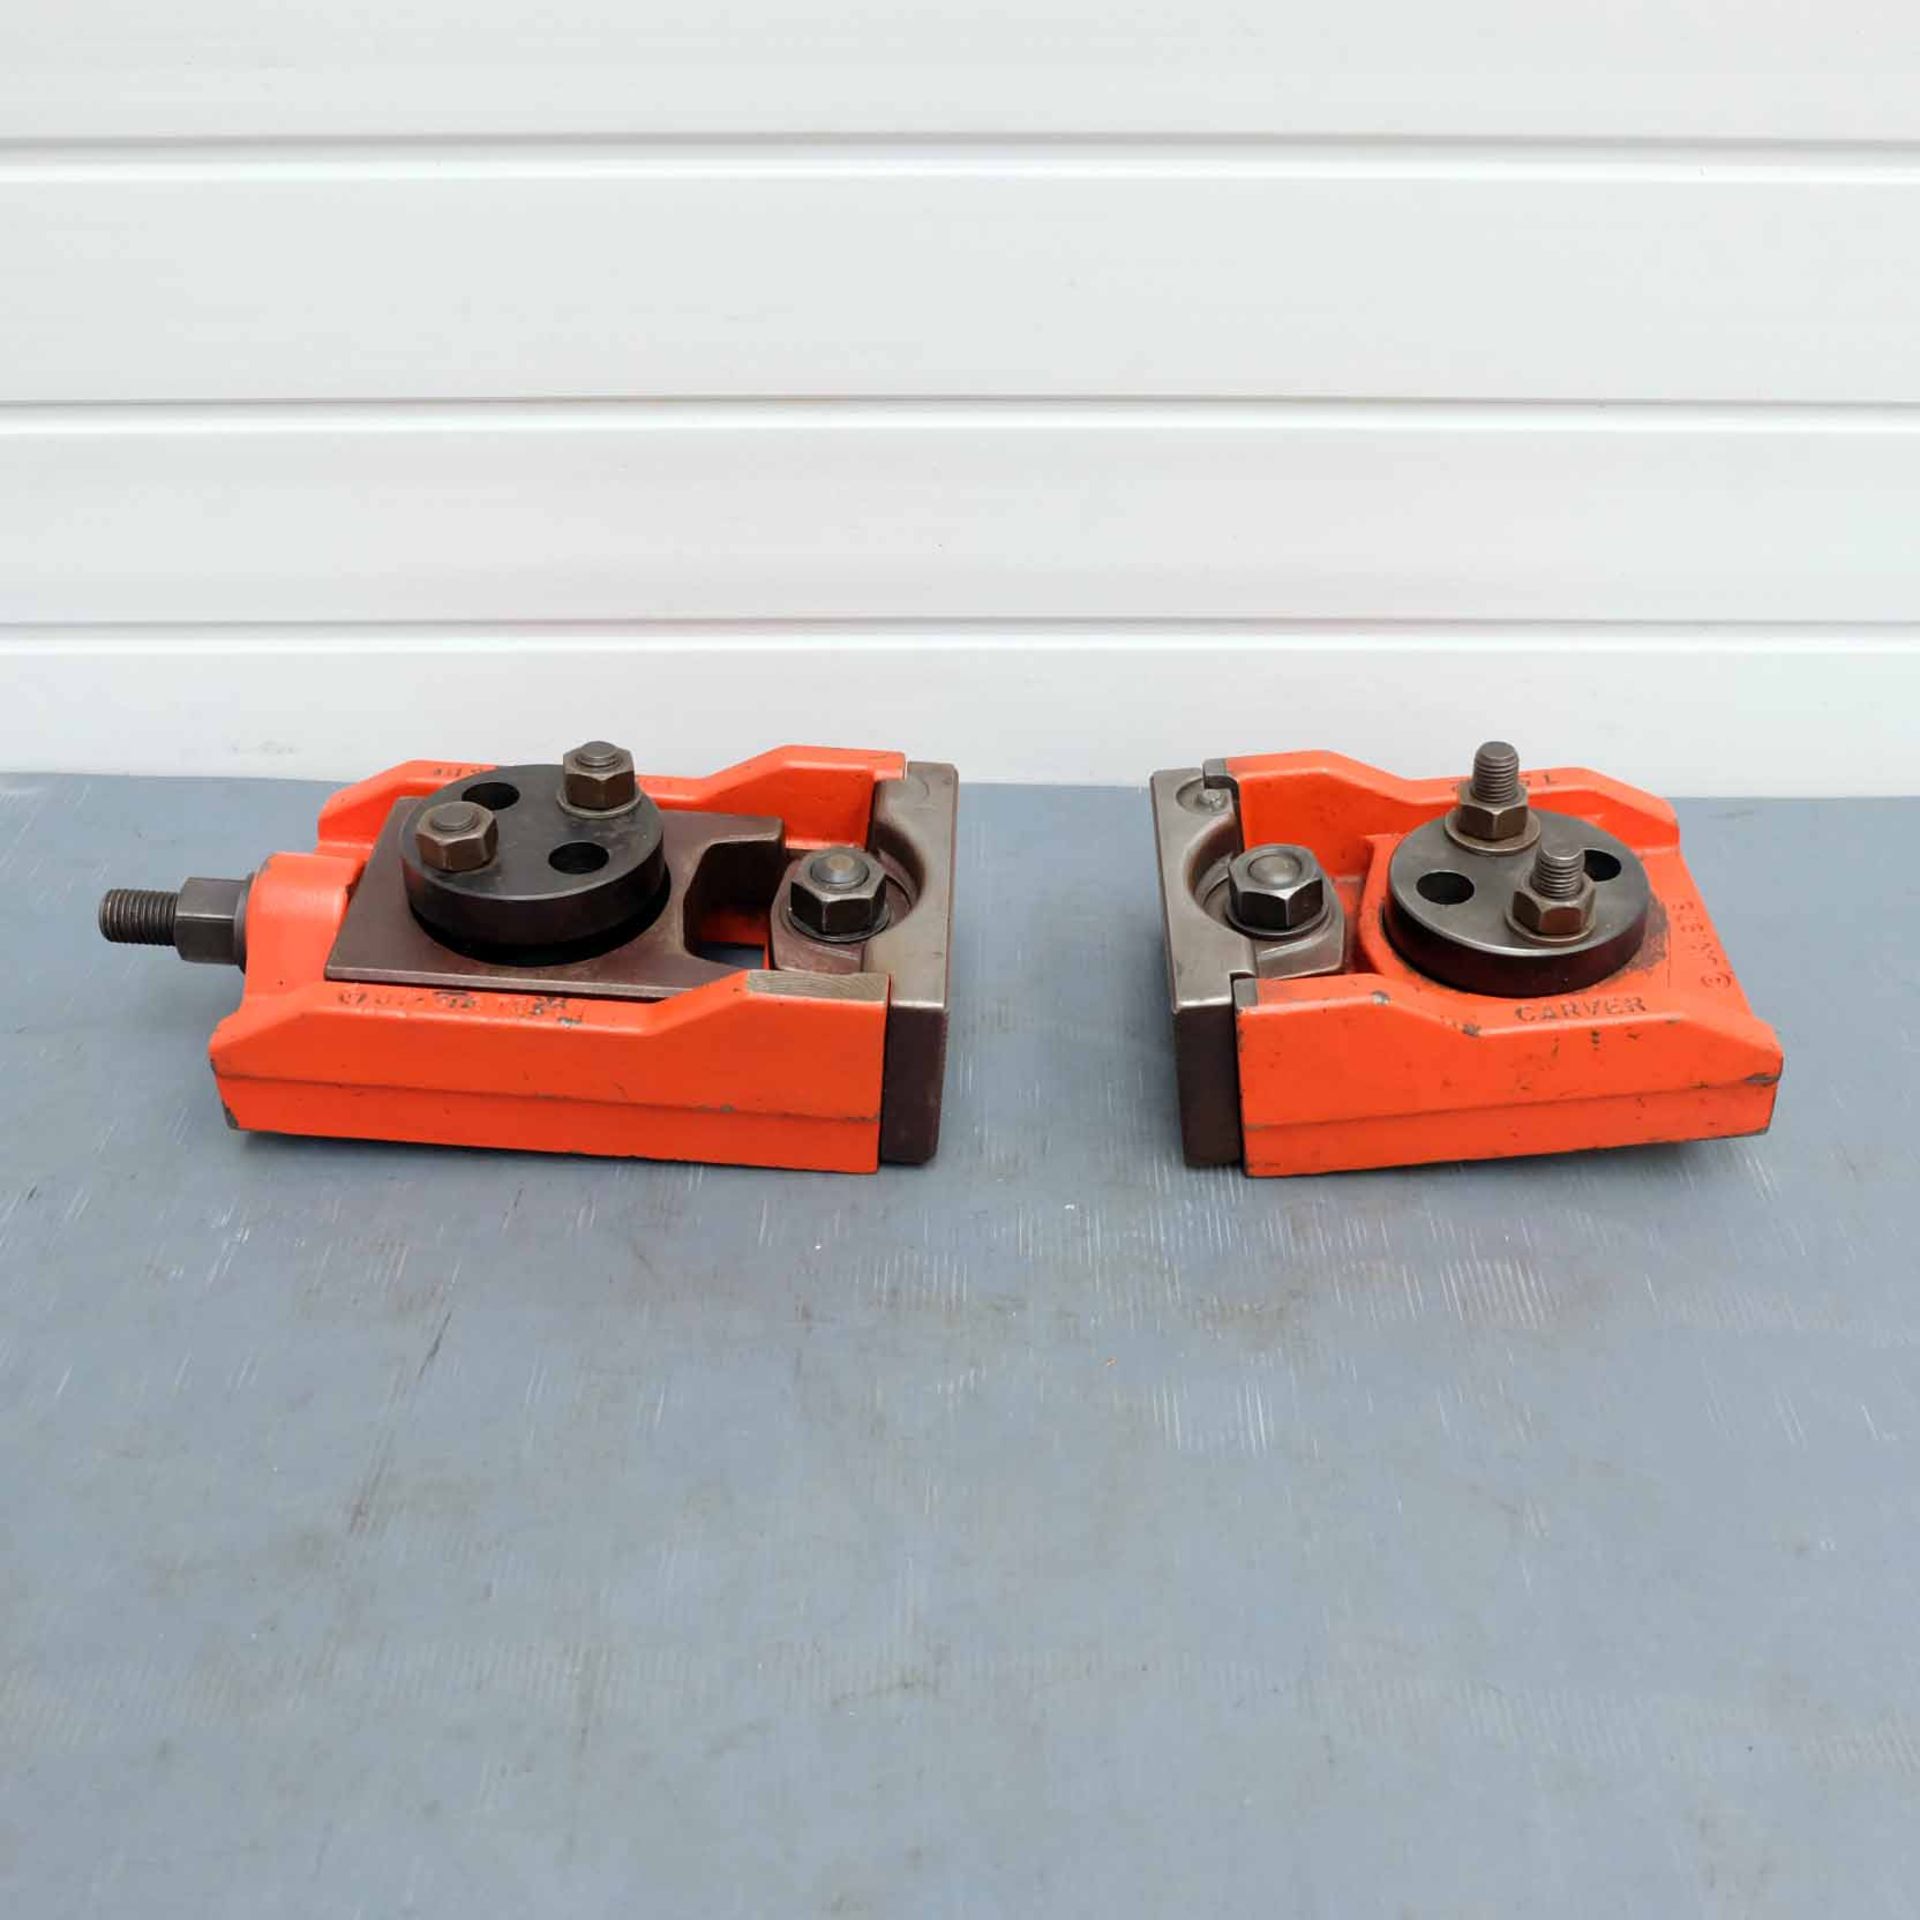 Set of Carver Heavy Duty Machine Clamps. Complete with Tee Bolts. Jaw Width 140mm. Jaw Height 70mm. - Image 6 of 7